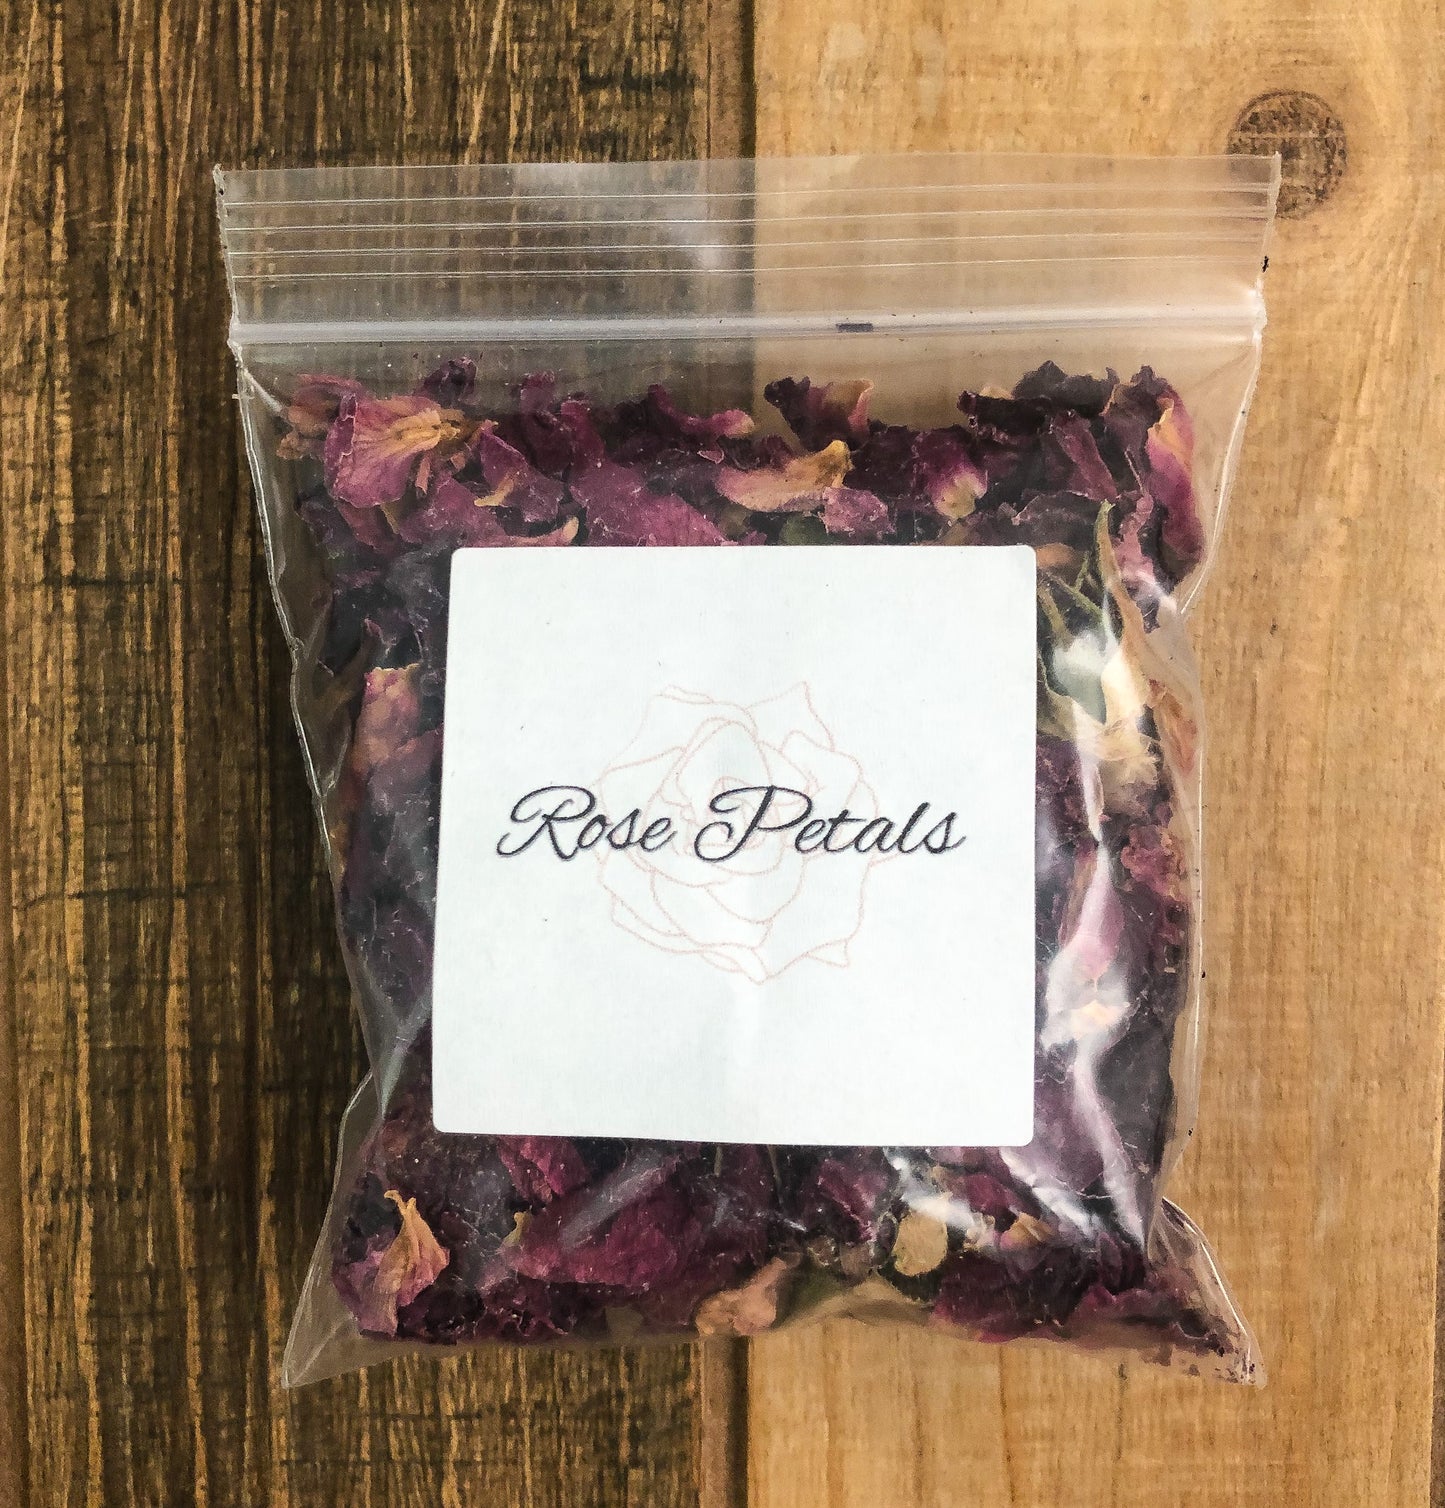 8g bag of dried roses in a clear plastic bag with a wooden background